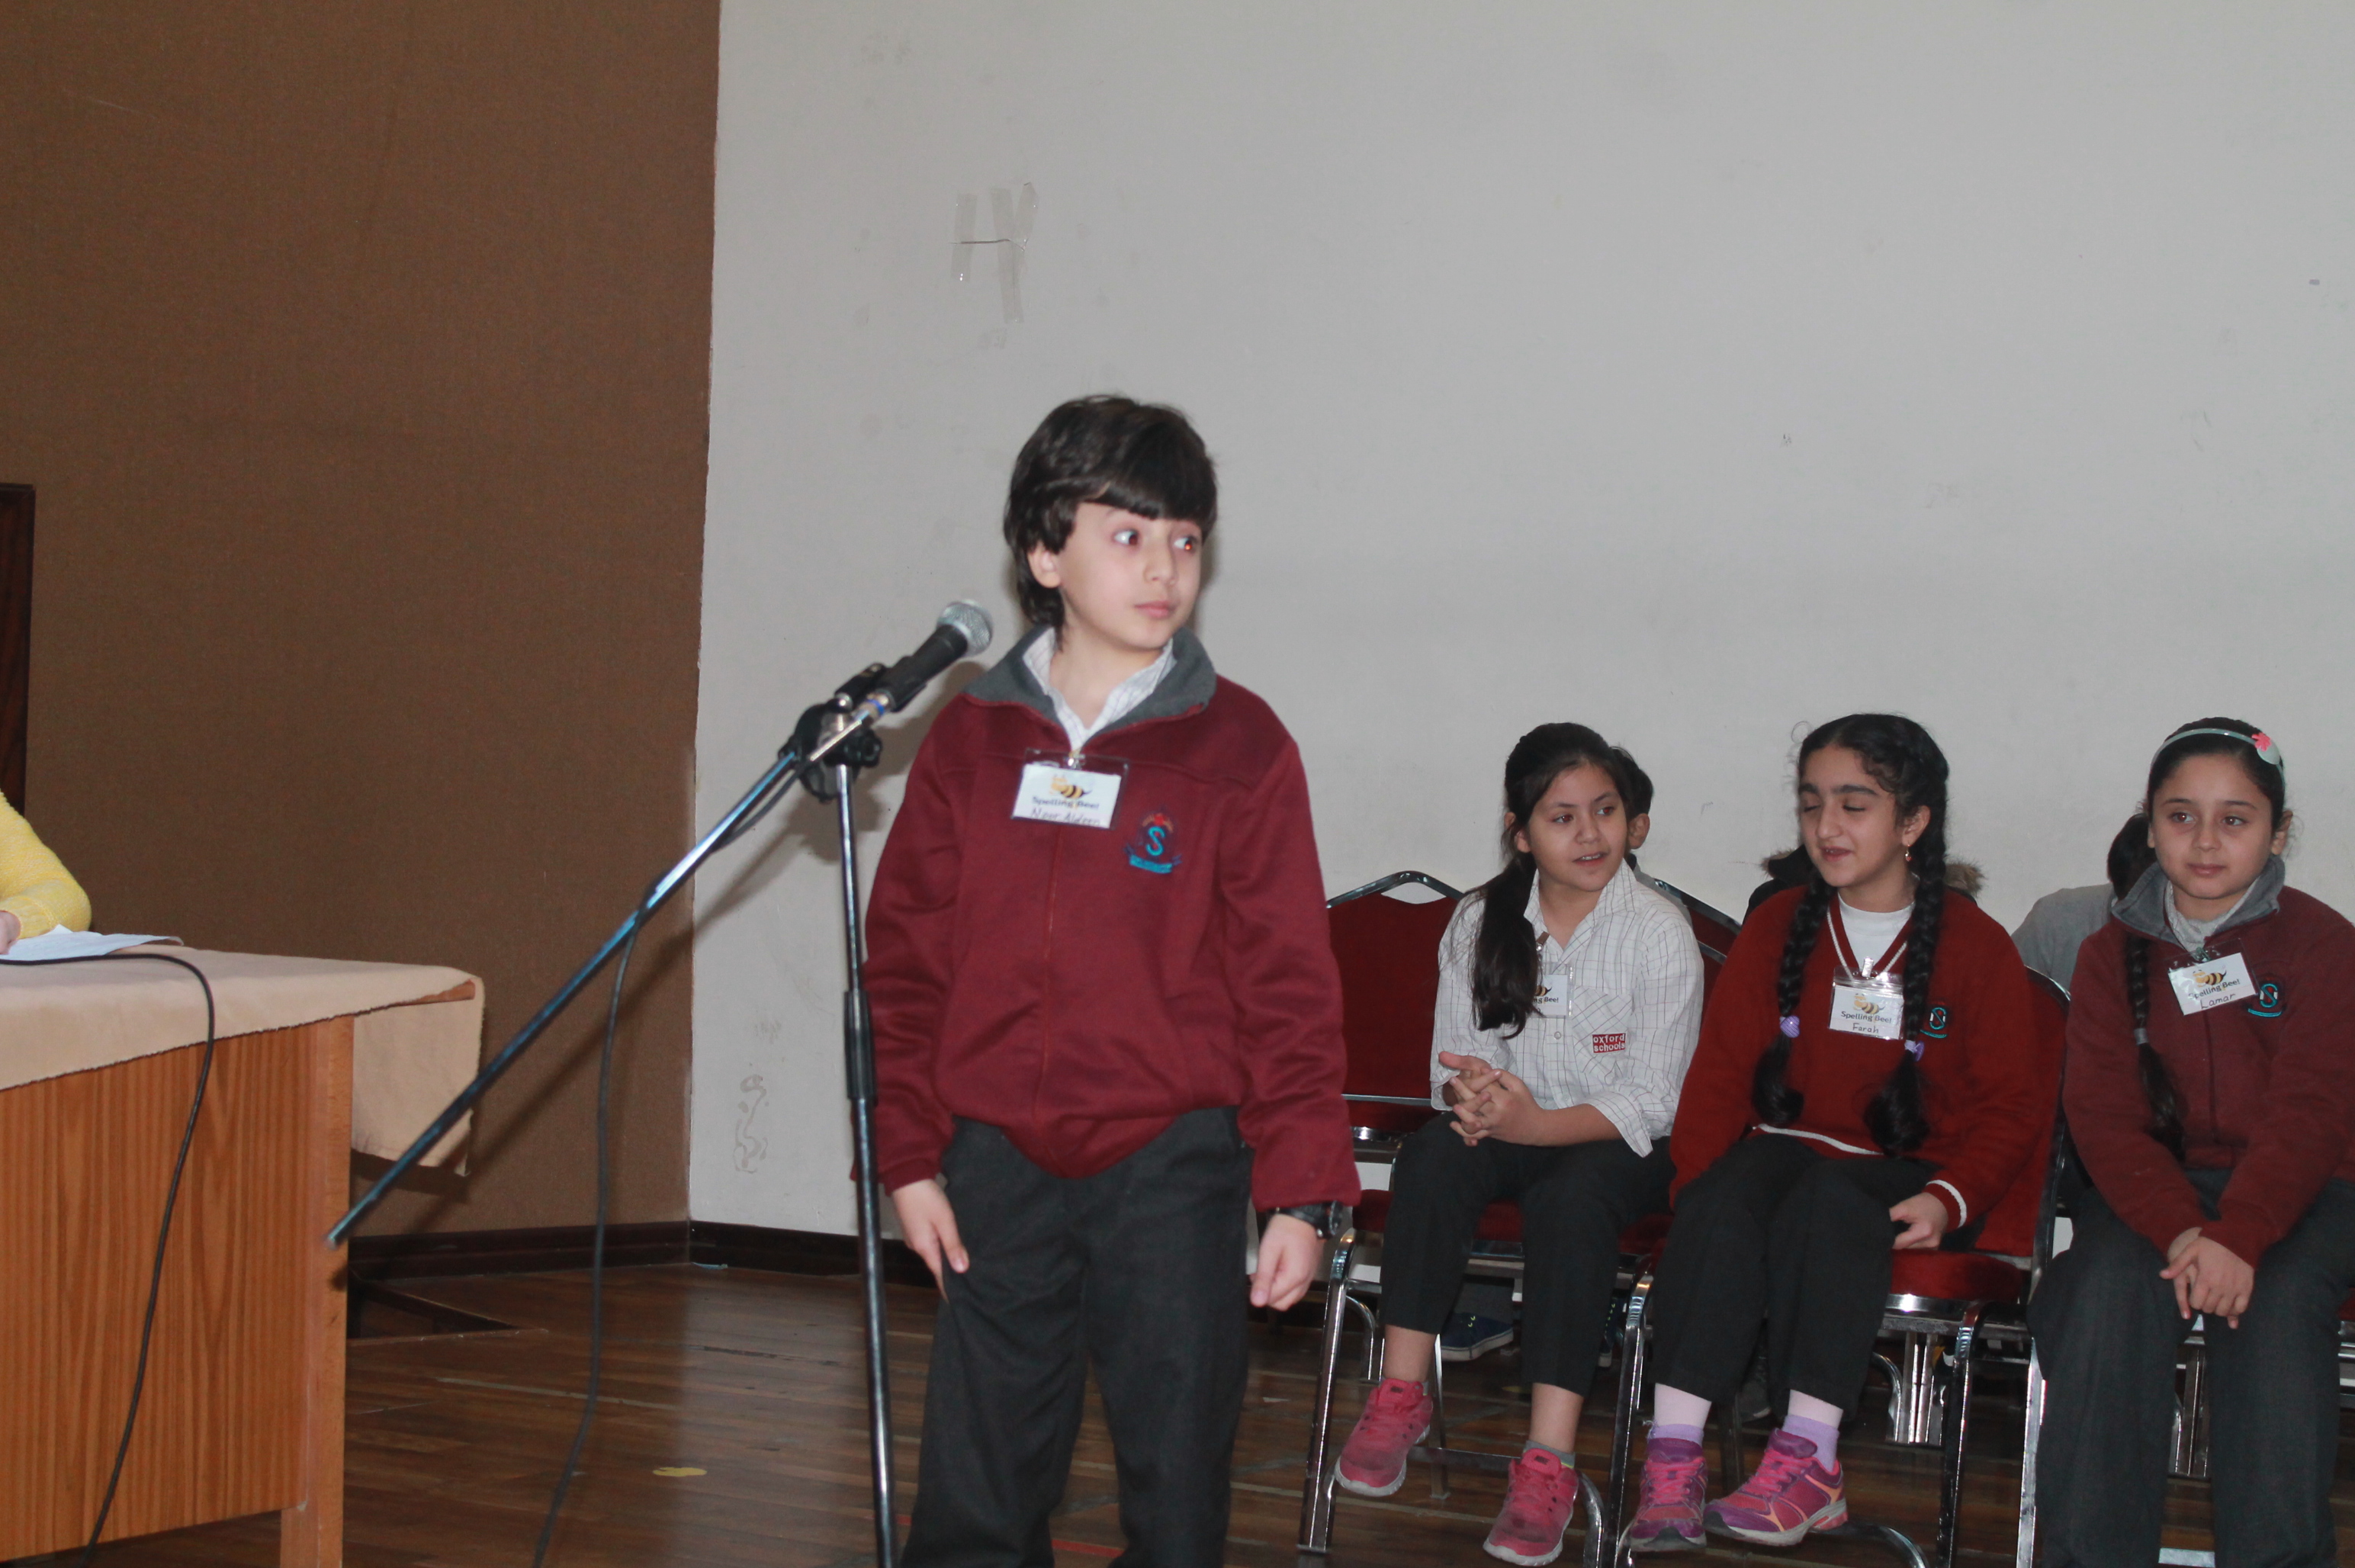 Spelling Bee Competition